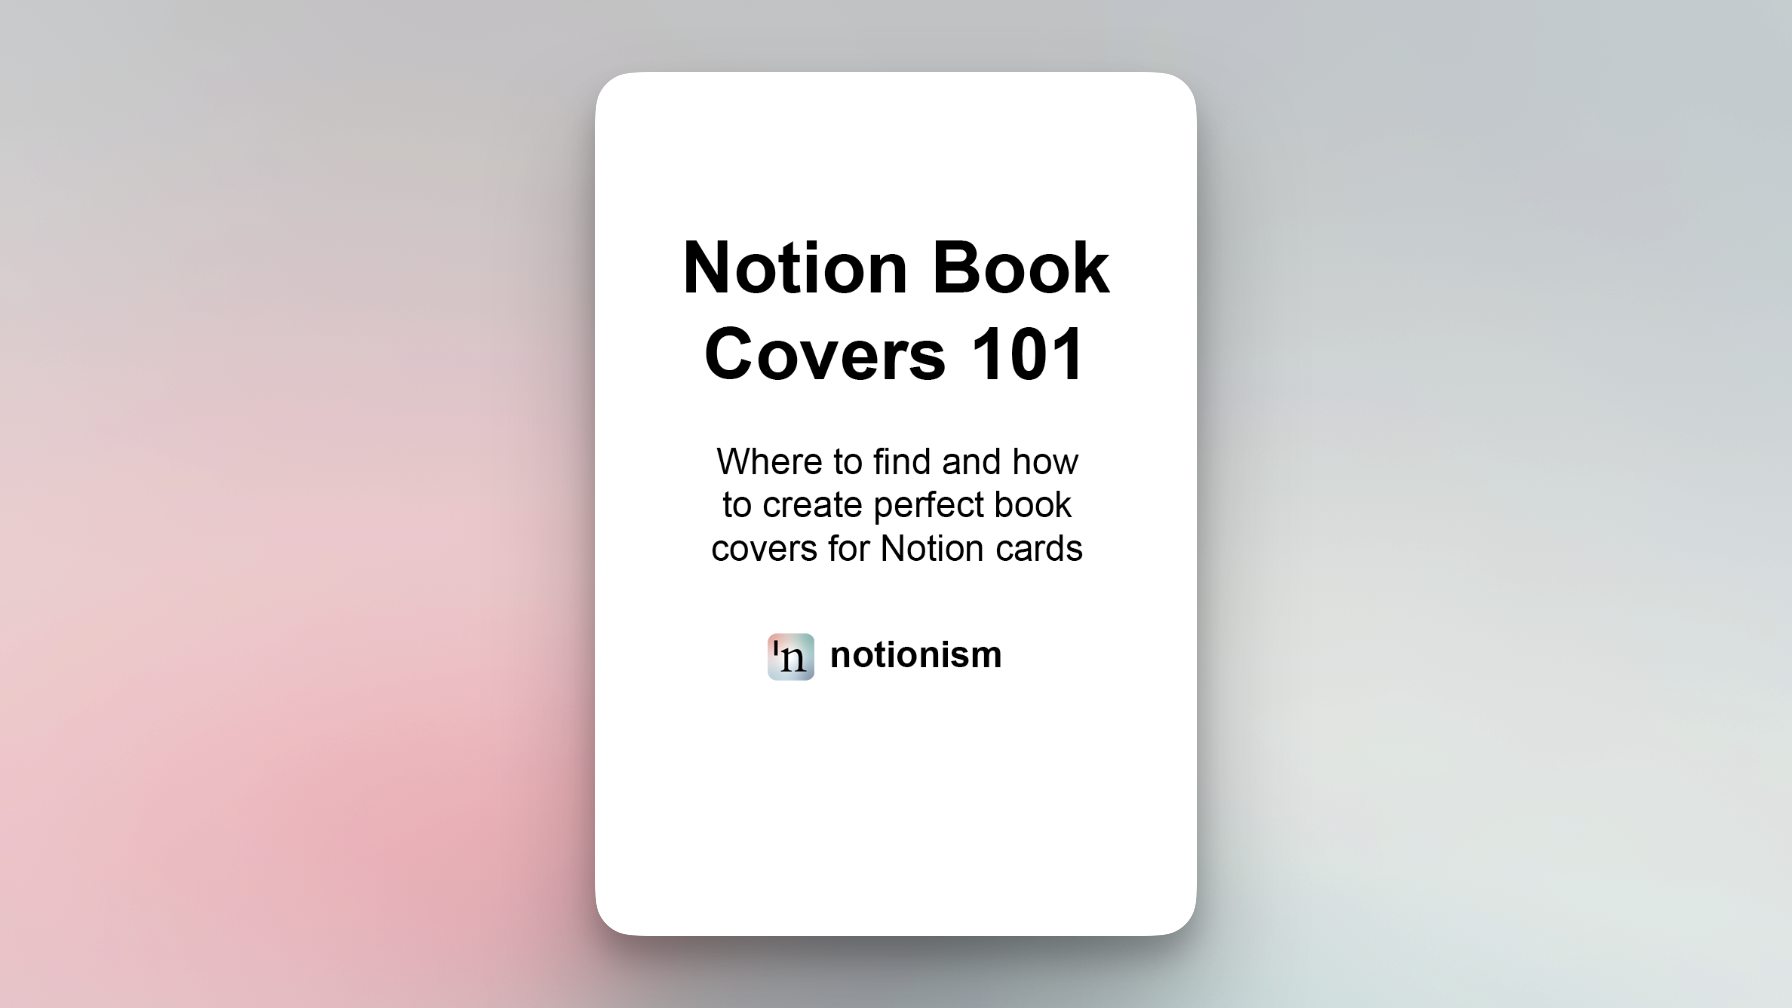 How to create a book cover for Notion